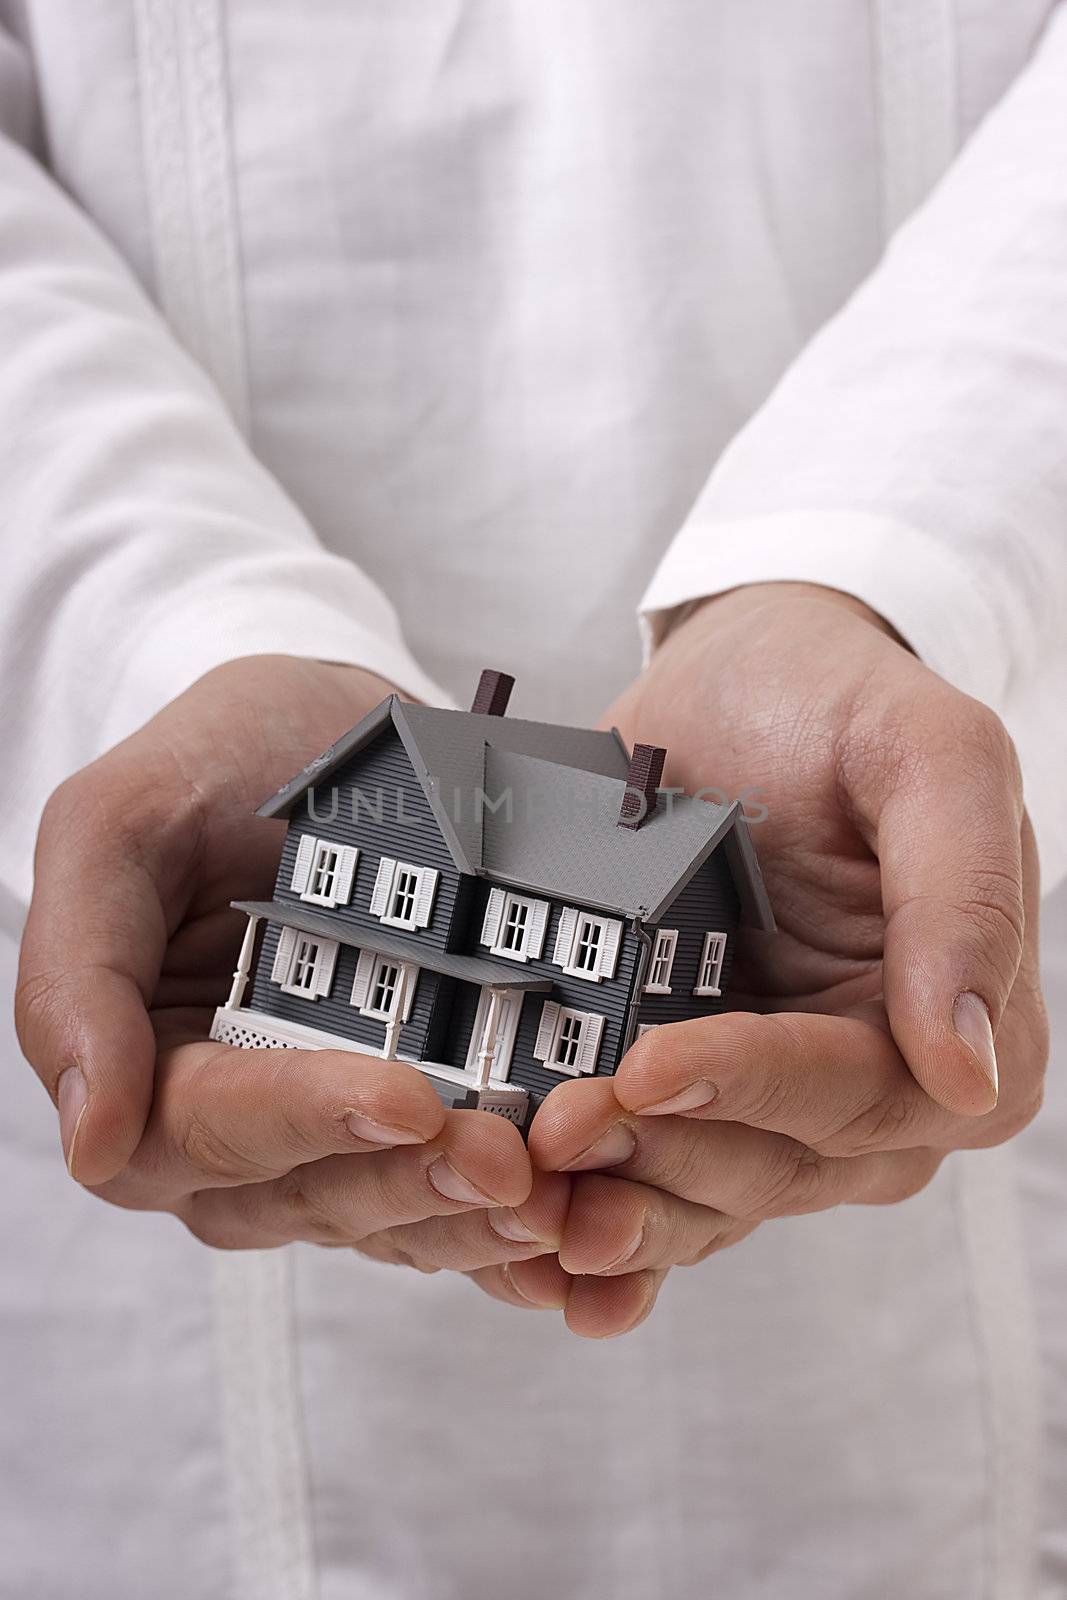 Man in white holding a model of a house in his hands.